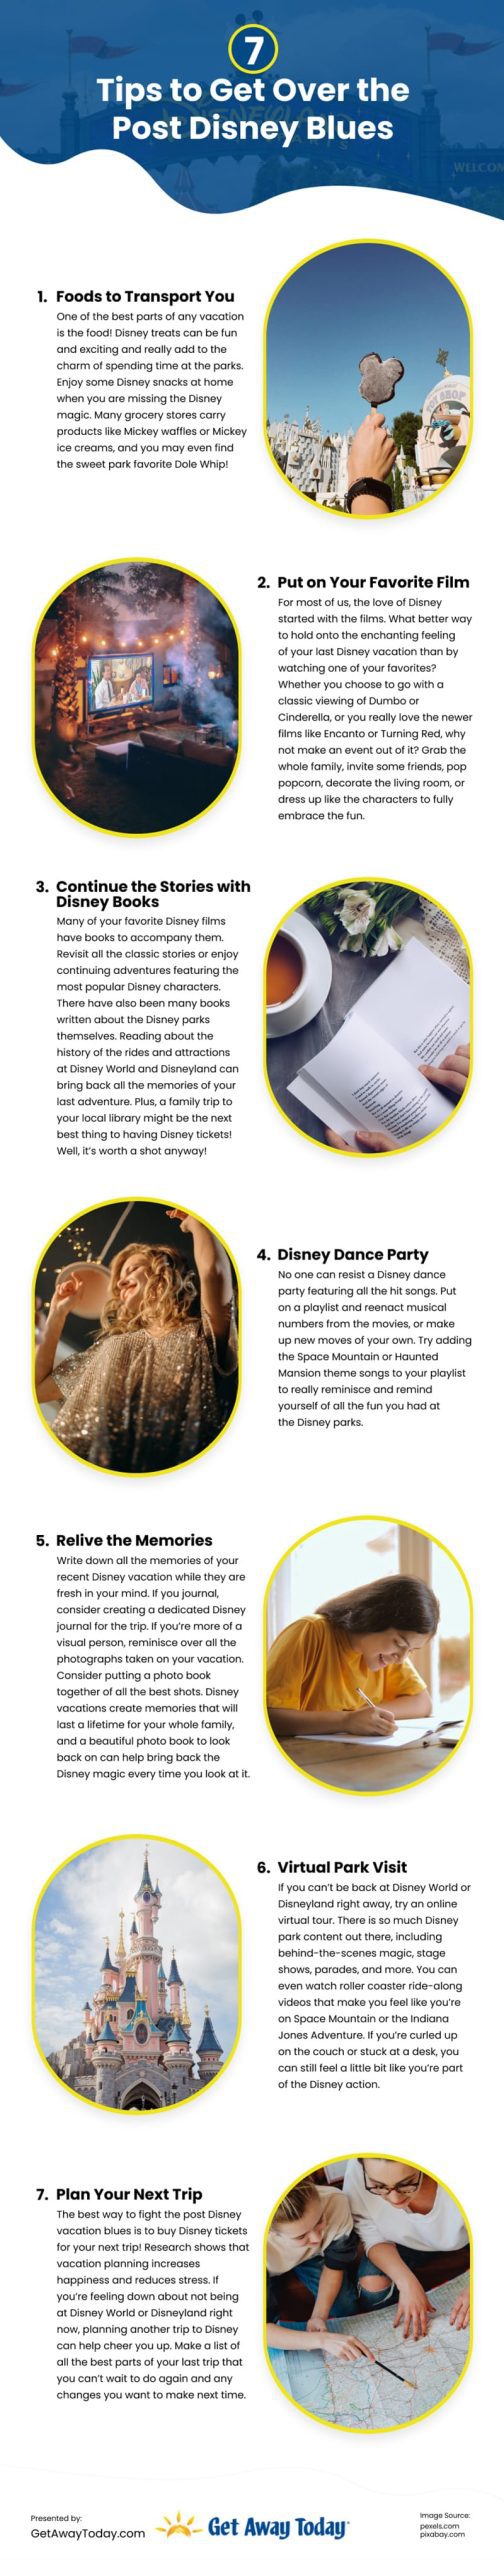 7 Tips to Get Over the Post Disney Blues Infographic